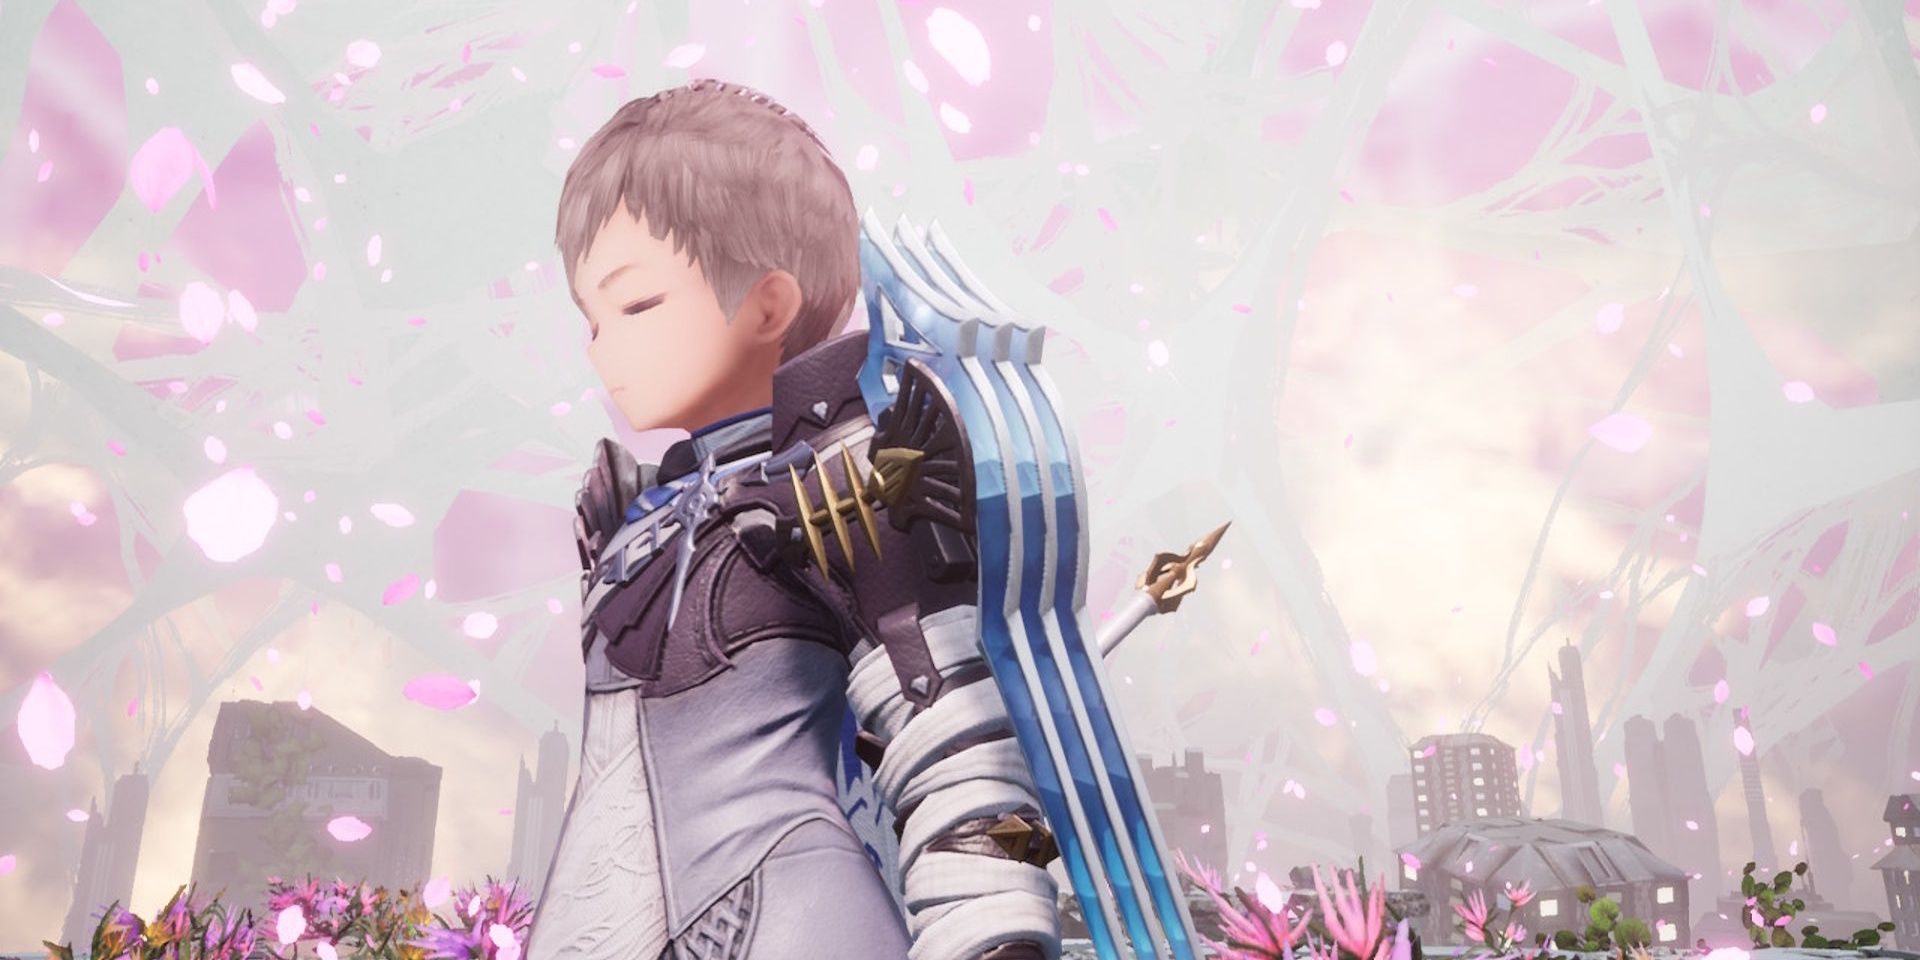 Asyl from Harvestella standing with his eyes closed amidst a field of flowers outside the city.